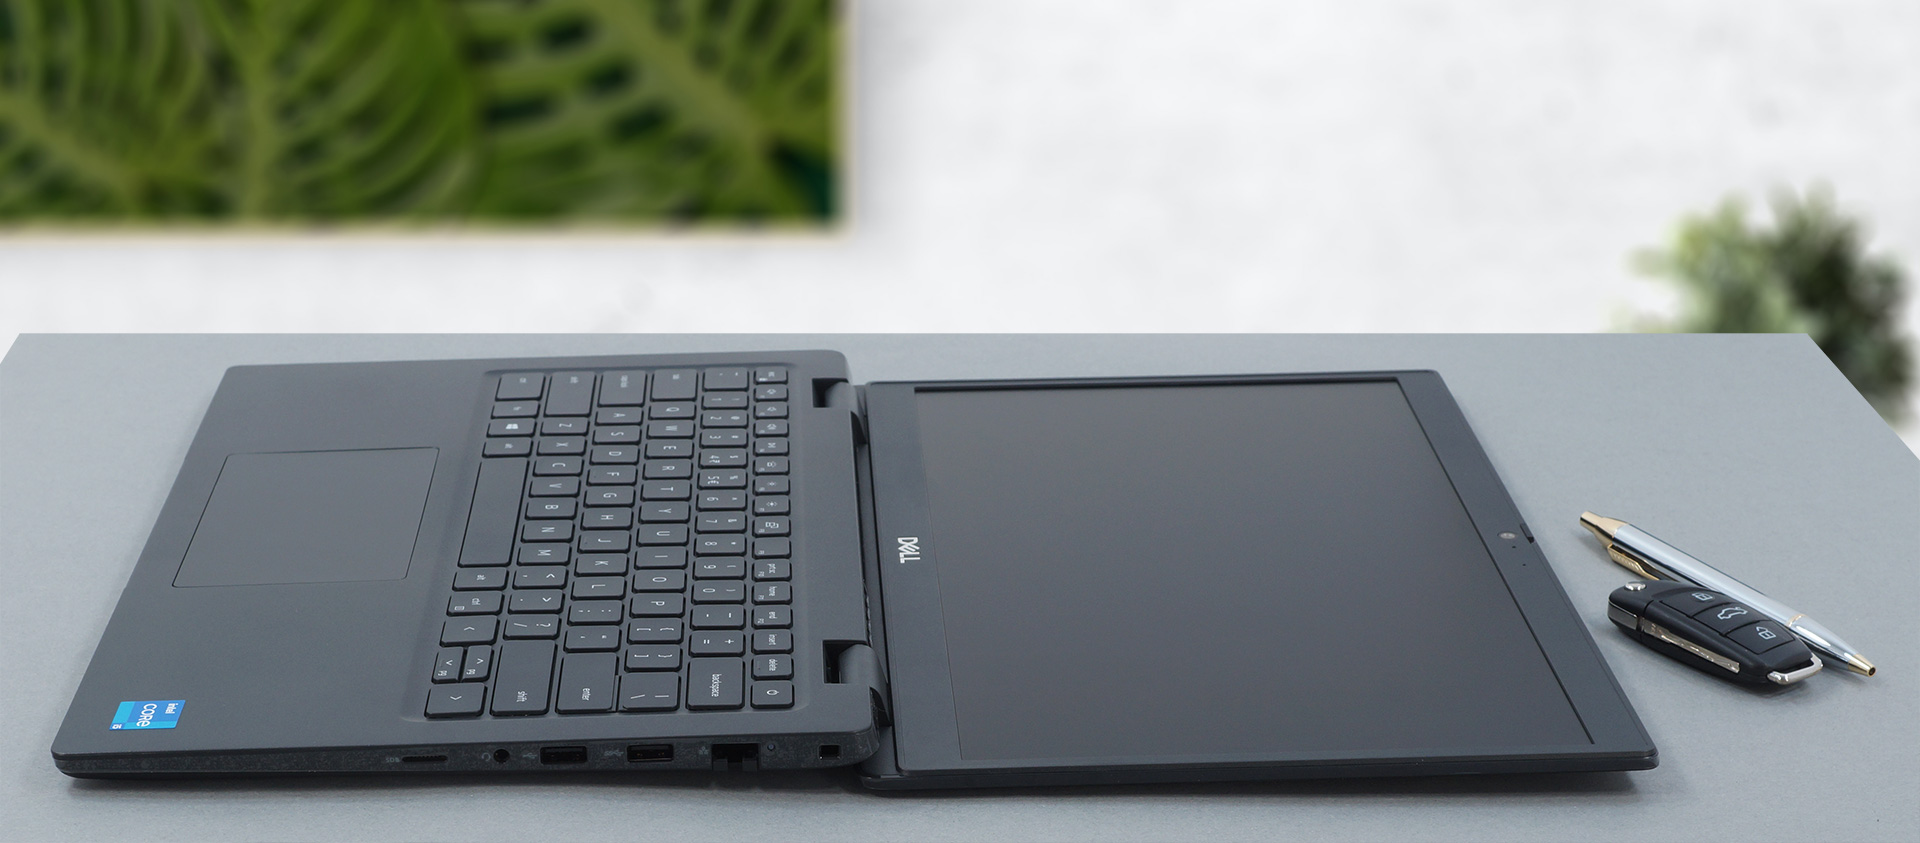 Dell Latitude 14 3420 review - some configurations are really good |  